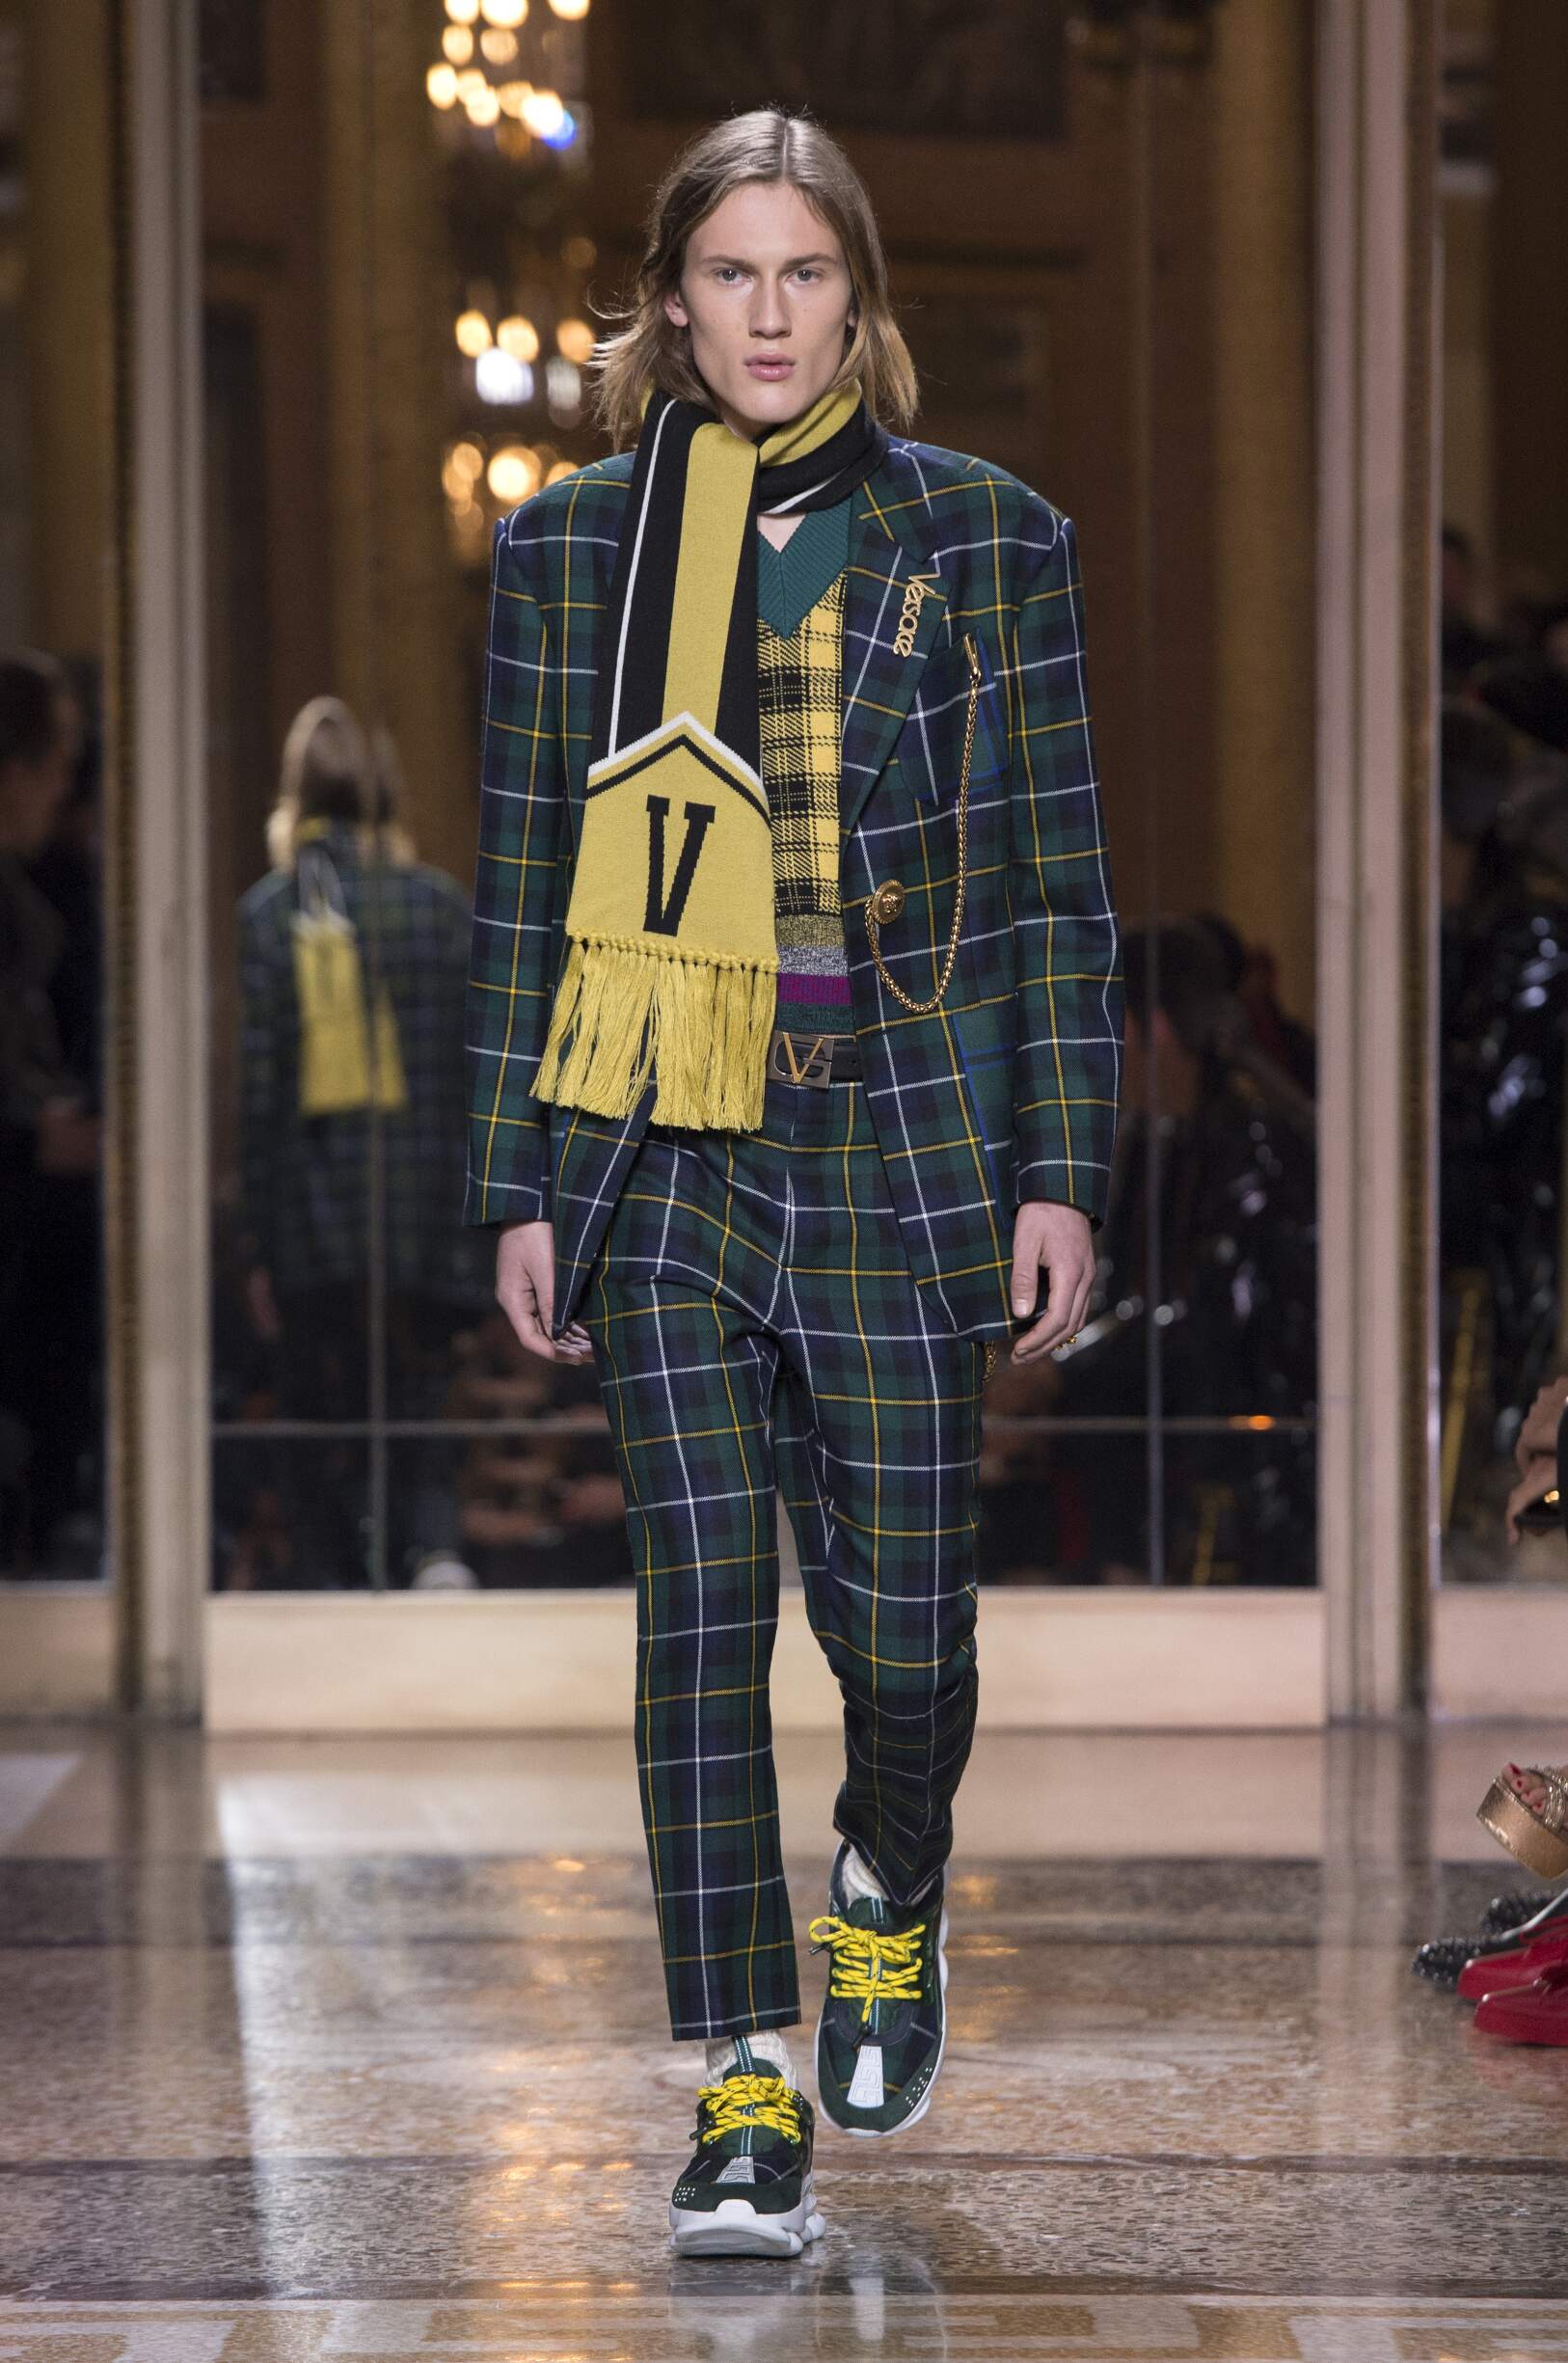 VERSACE FALL WINTER 2018 MEN’S COLLECTION | The Skinny Beep1626 x 2450